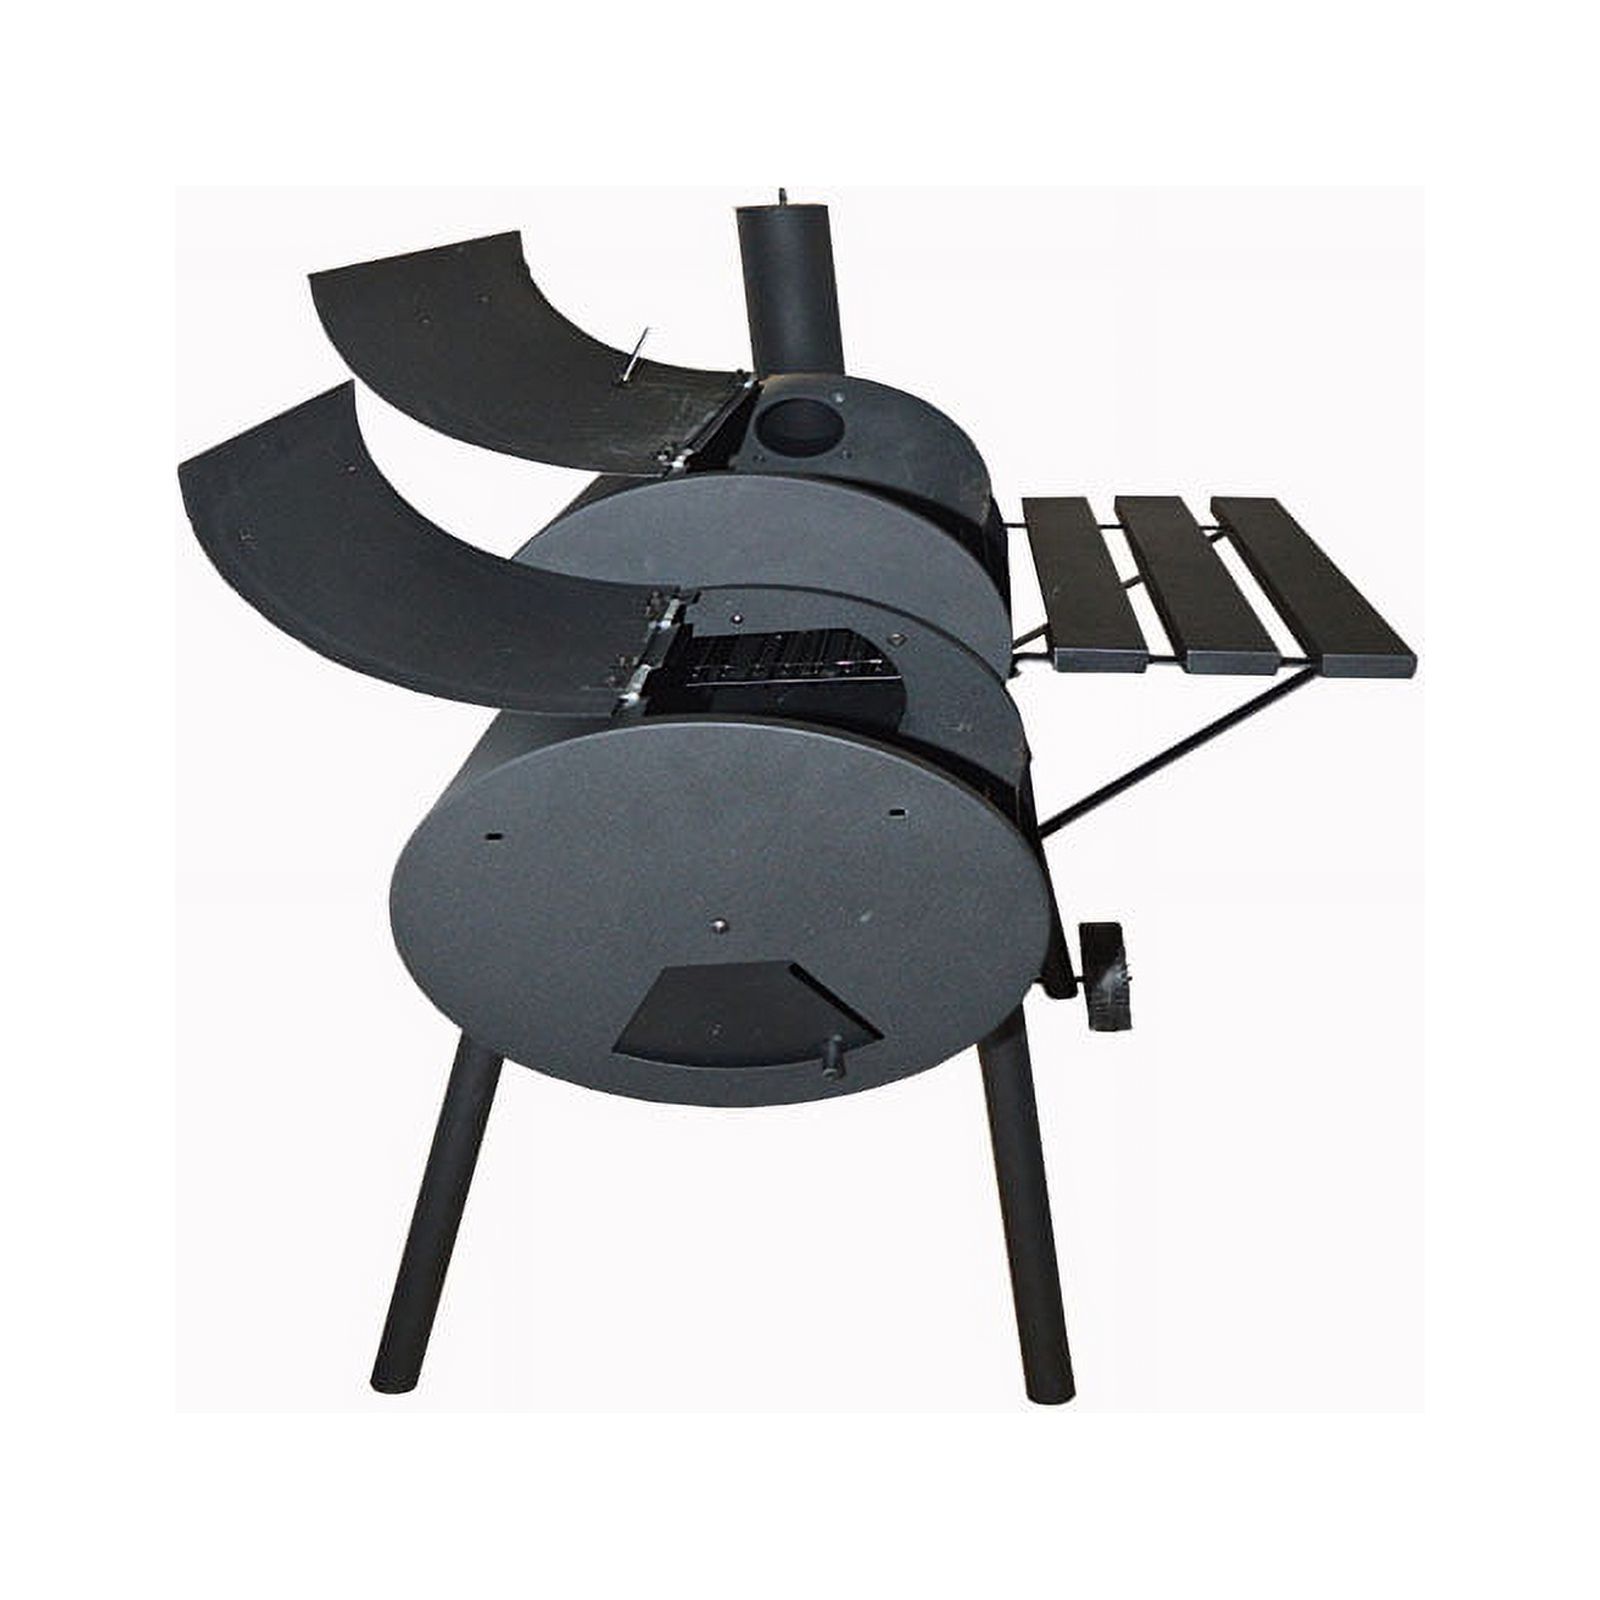 INTBUYING Outdoor BBQ Grill Camping Garden Charcoal Barbecue Stove Grills - image 3 of 8